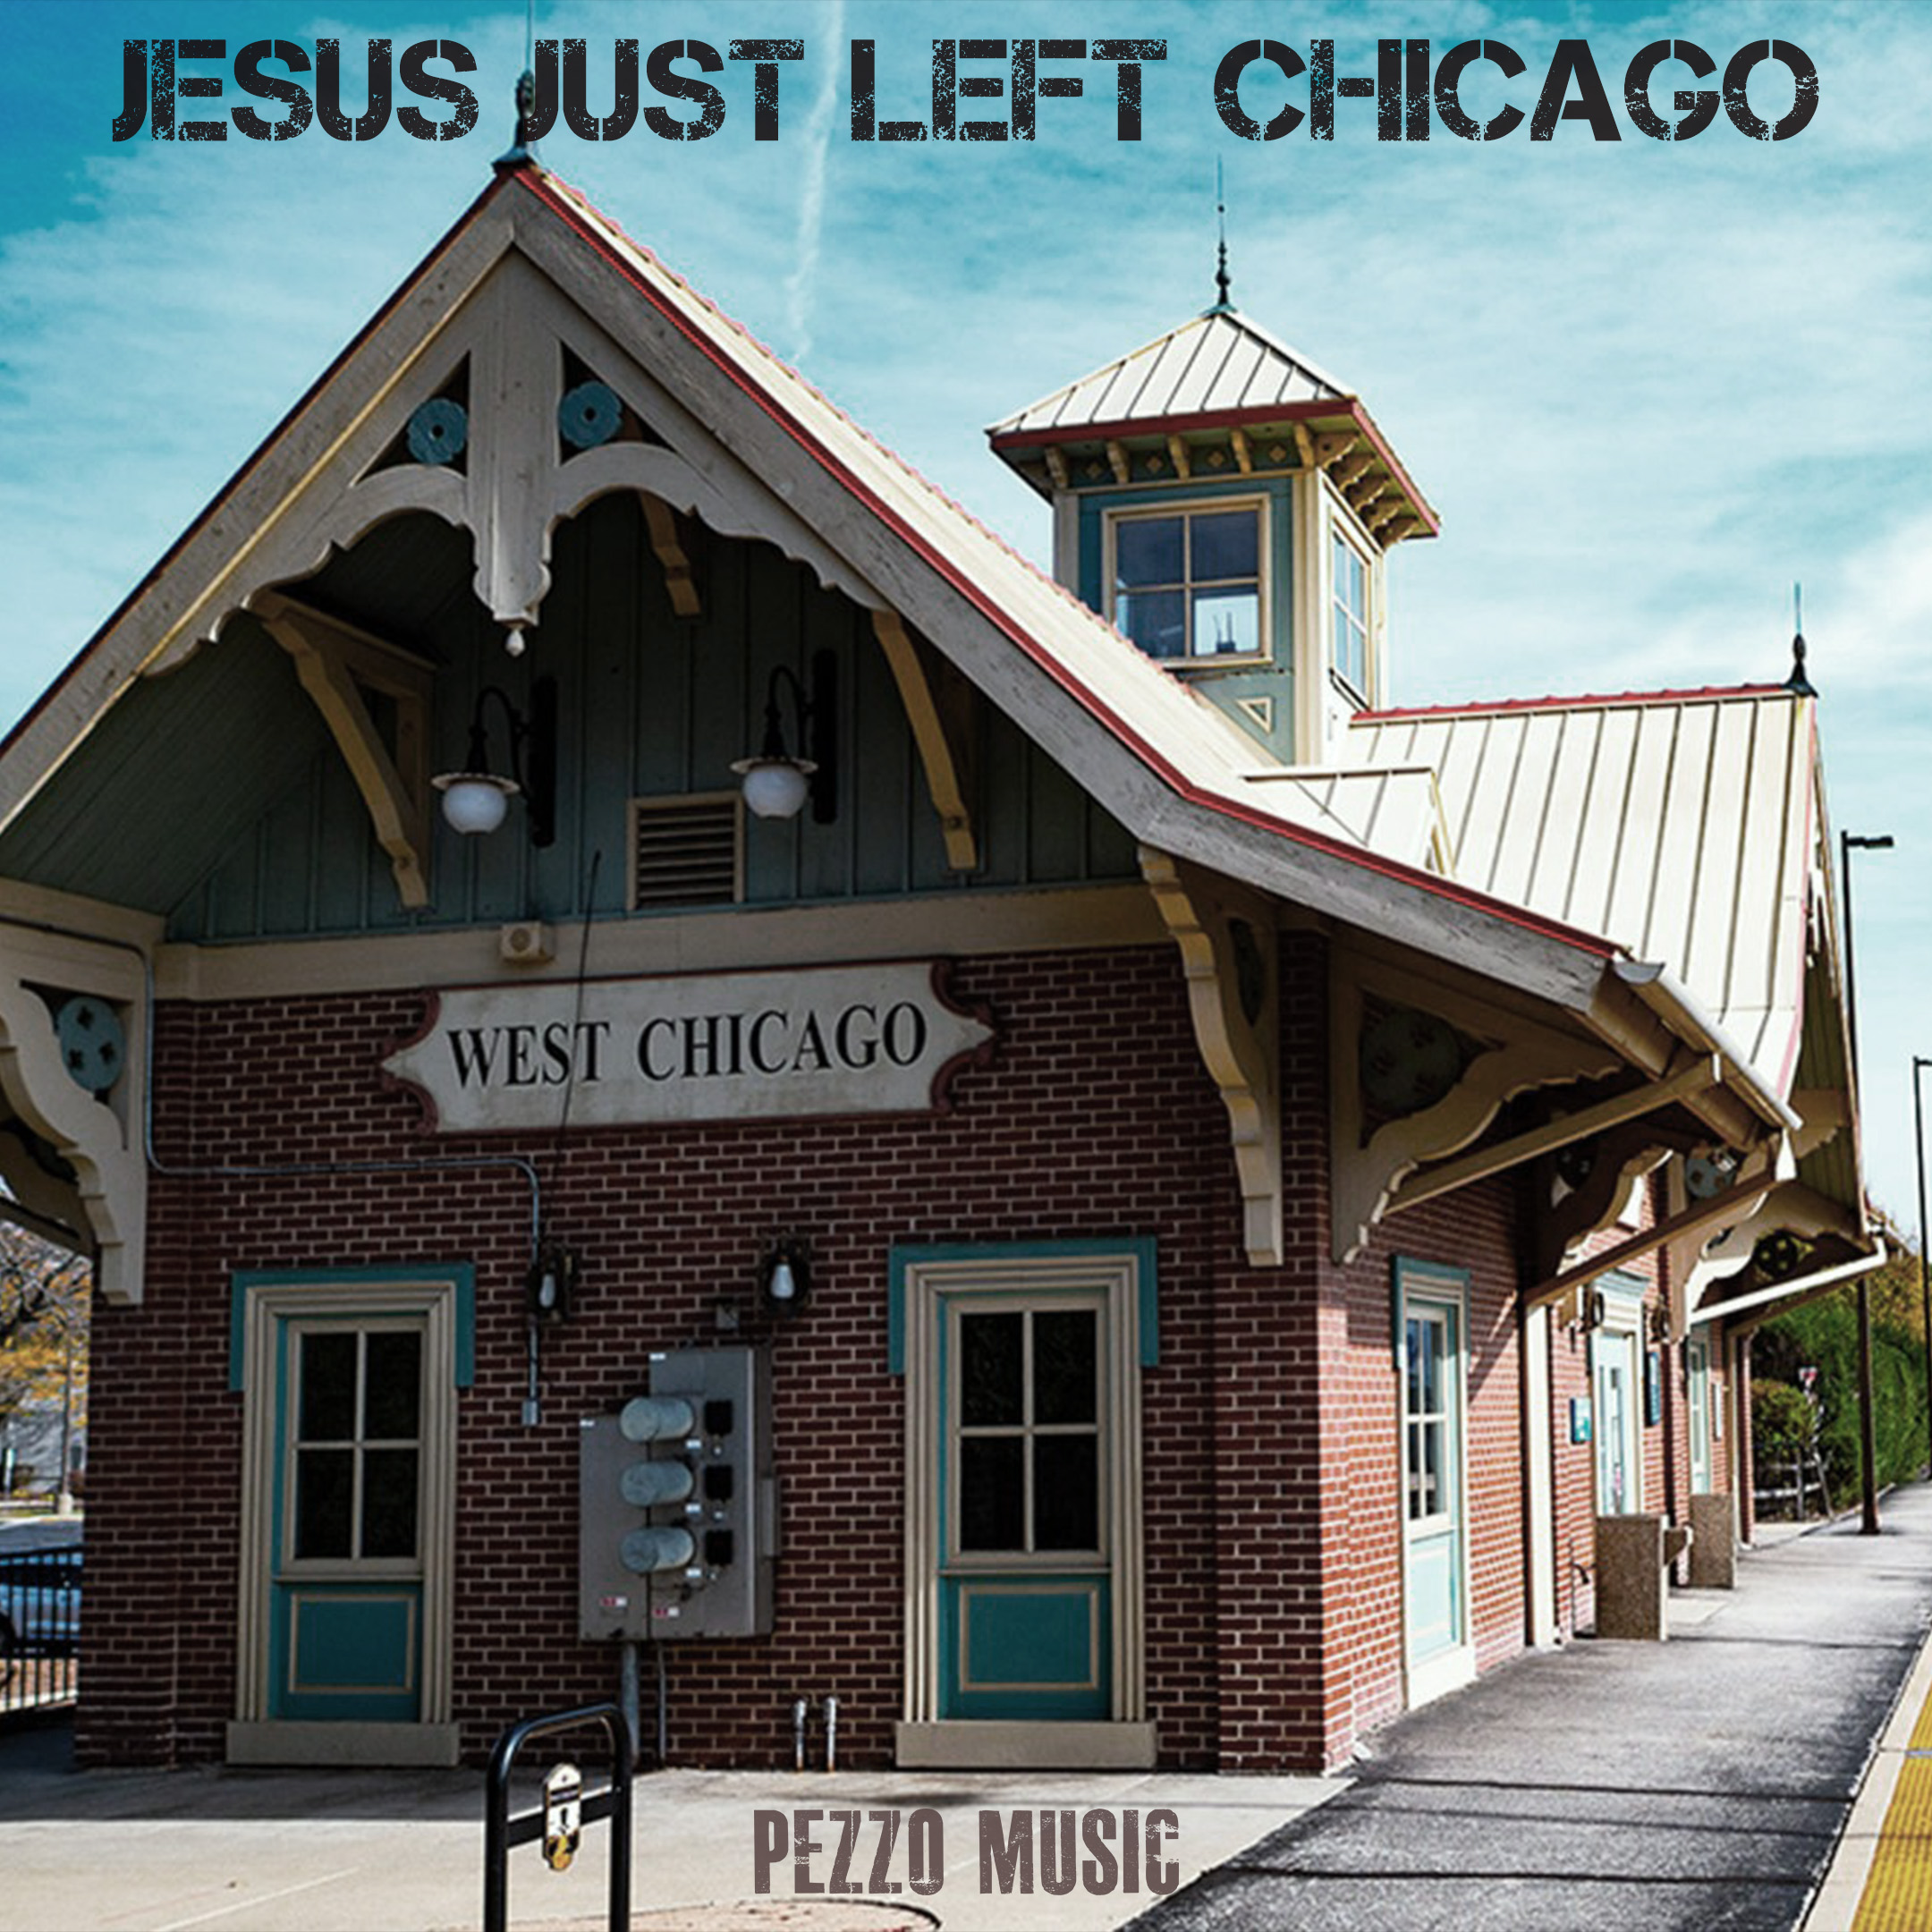 ZZ Top - Jesus Just Left Chicago (Cover by Pezzo)